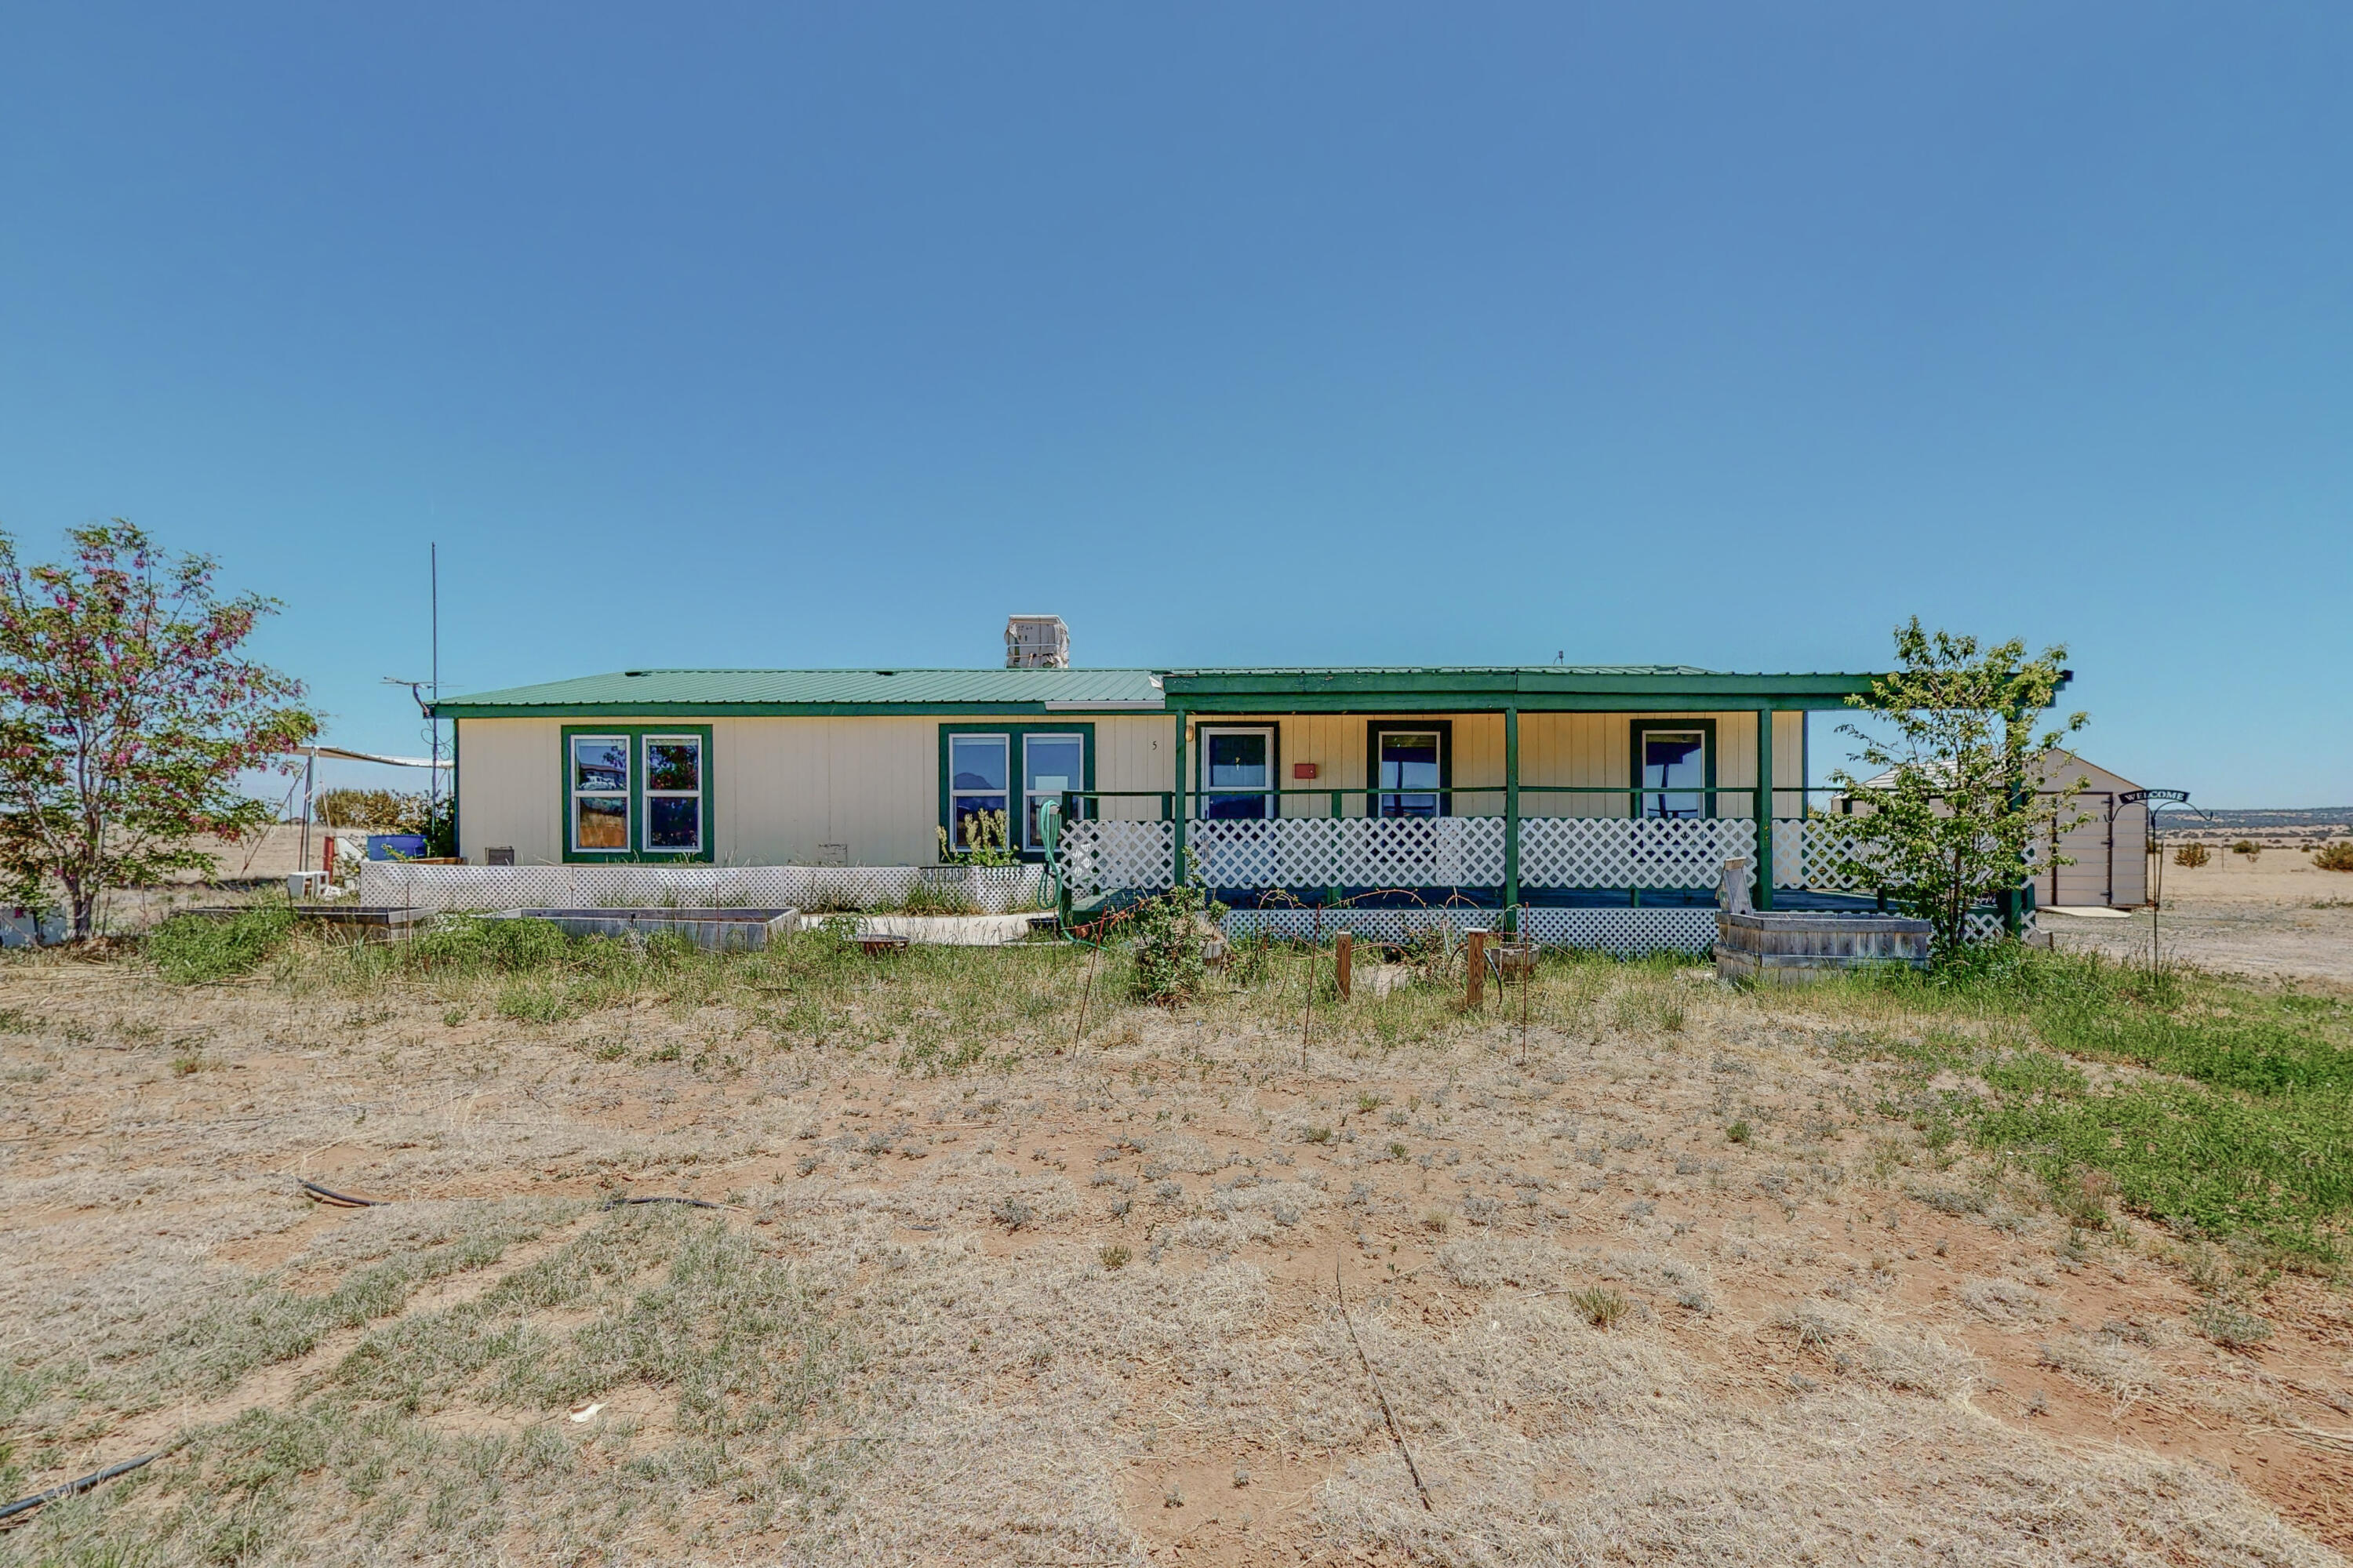 Cute move-in ready Cavco home on 2.5 acres only minutes from Edgewood!  Close yet far out enough for peace and quiet and amazing New Mexico skies. Gorgeous 360 degree views.  Home has 3 bedrooms and 2 baths. Large front covered deck for relaxing after a long day.  New low-E windows installed in 2018.  Large 2.5 acres lot is level and perfect for gardening, a horse, or the type of country living you want to experience.  Lots of storage in huge primary bedroom closet.  Storage shed stays with property! Seller is offering a $2500 flooring credit upon closing. Real property/perm. foundation.